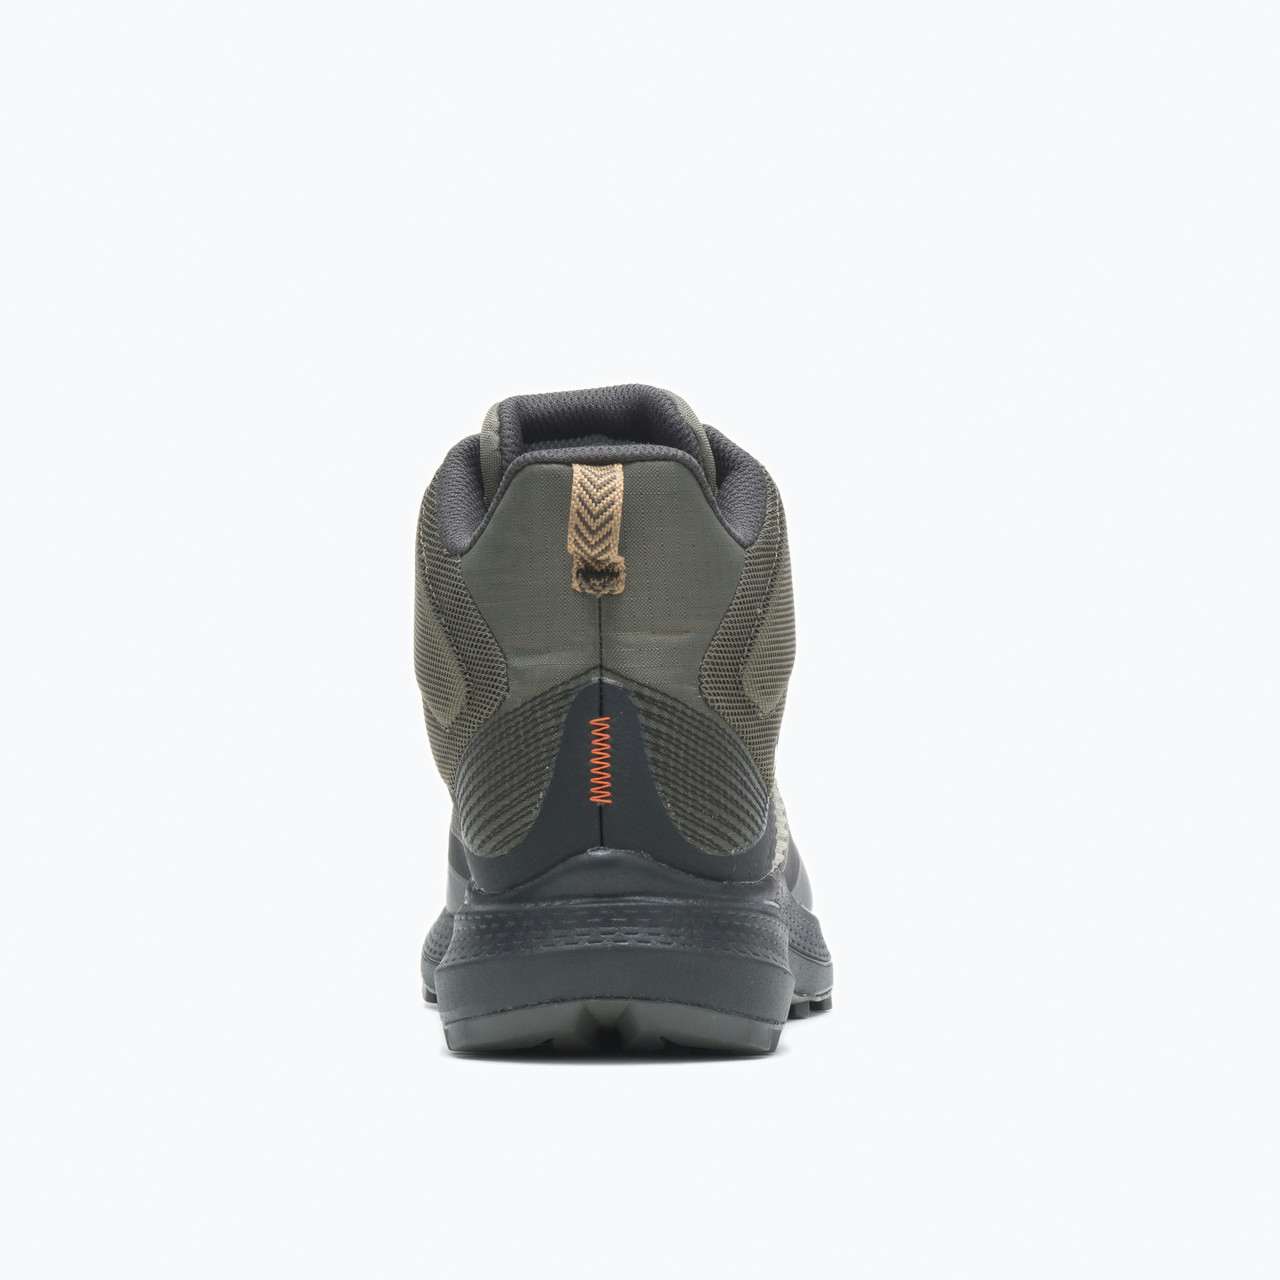 MQM 3 Mid Gore-Tex Light Trail Shoes Olive